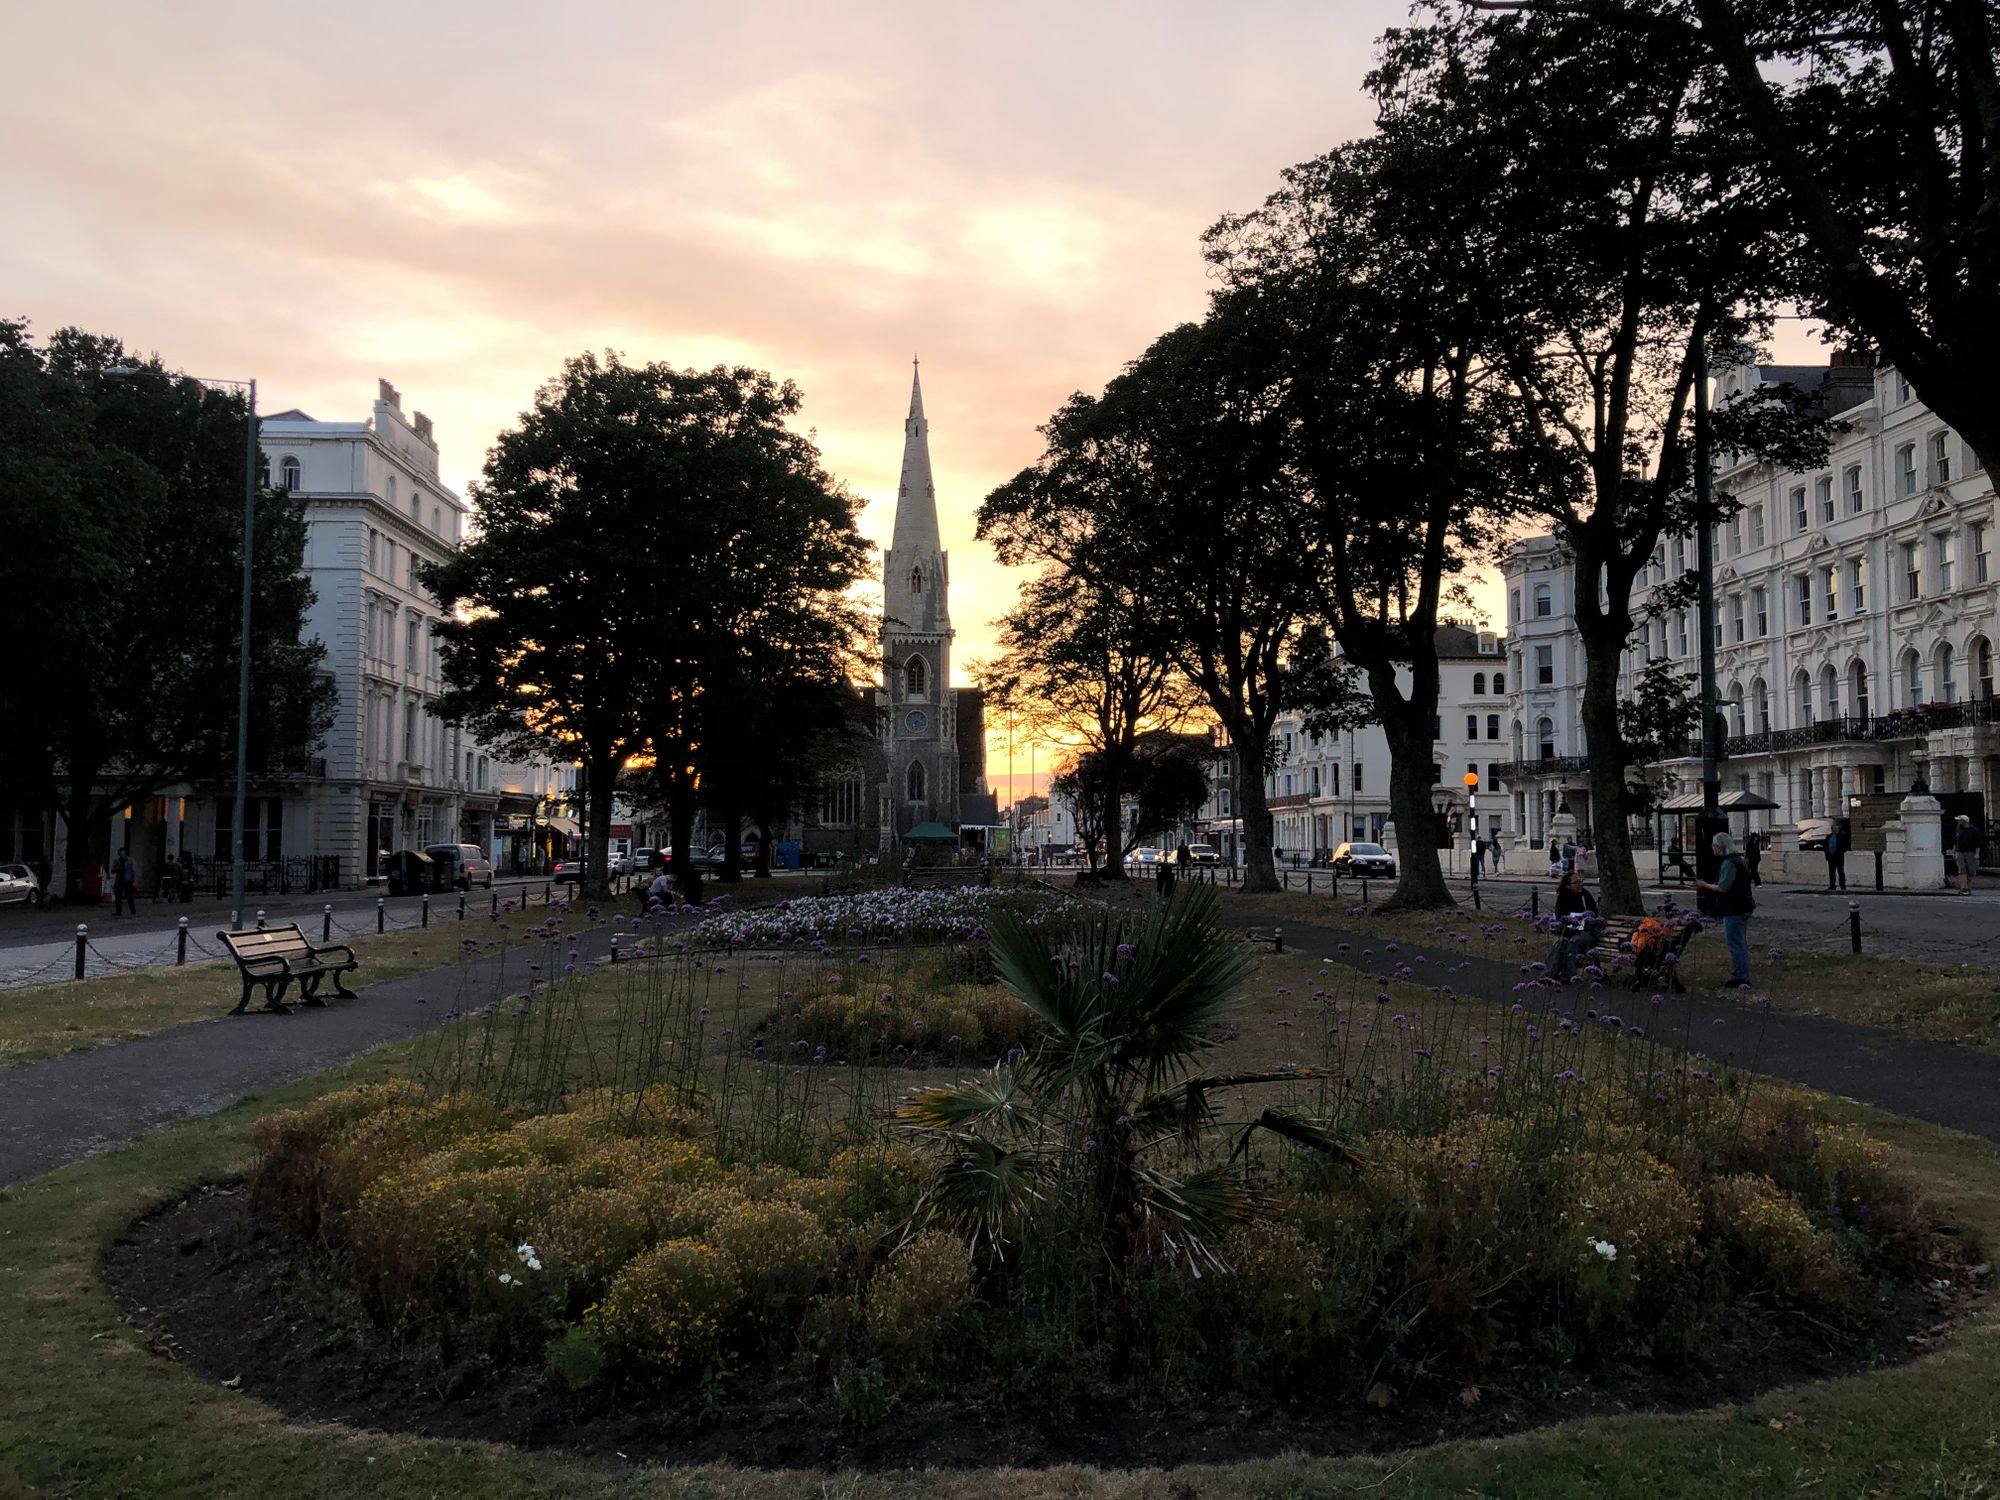 Picture of the sun setting by Madeira Square